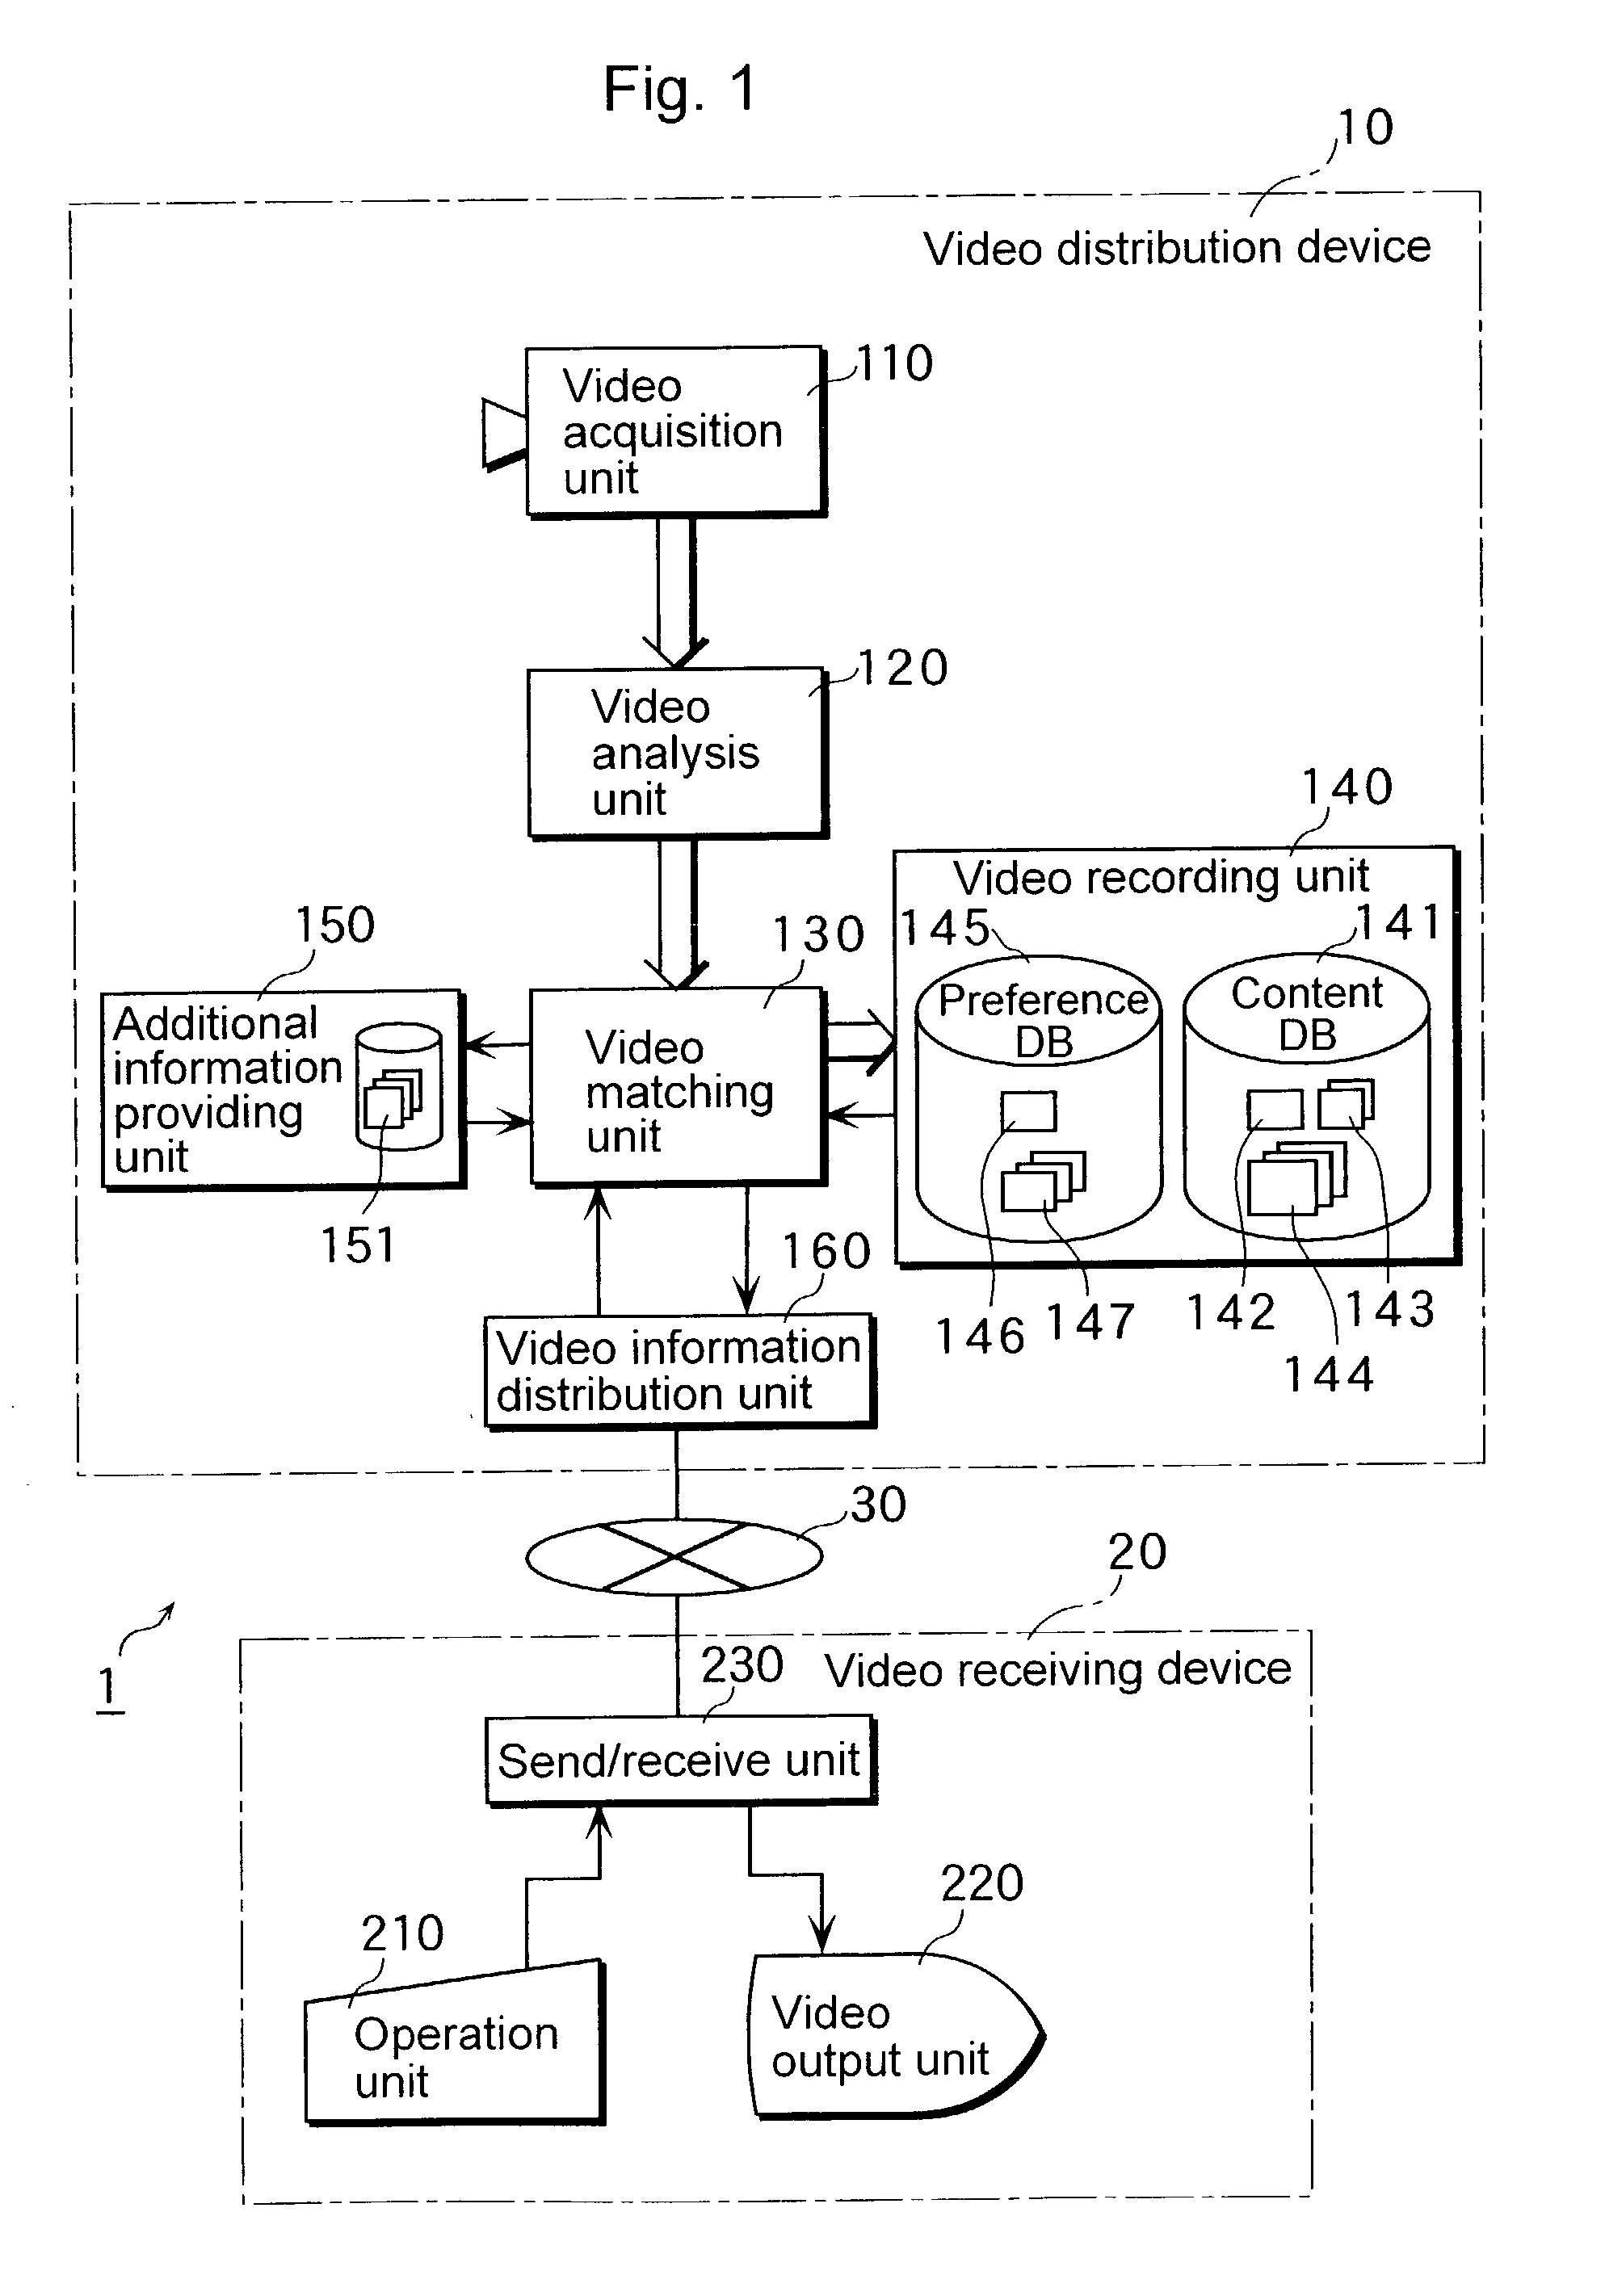 Video distribution device and a video receiving device